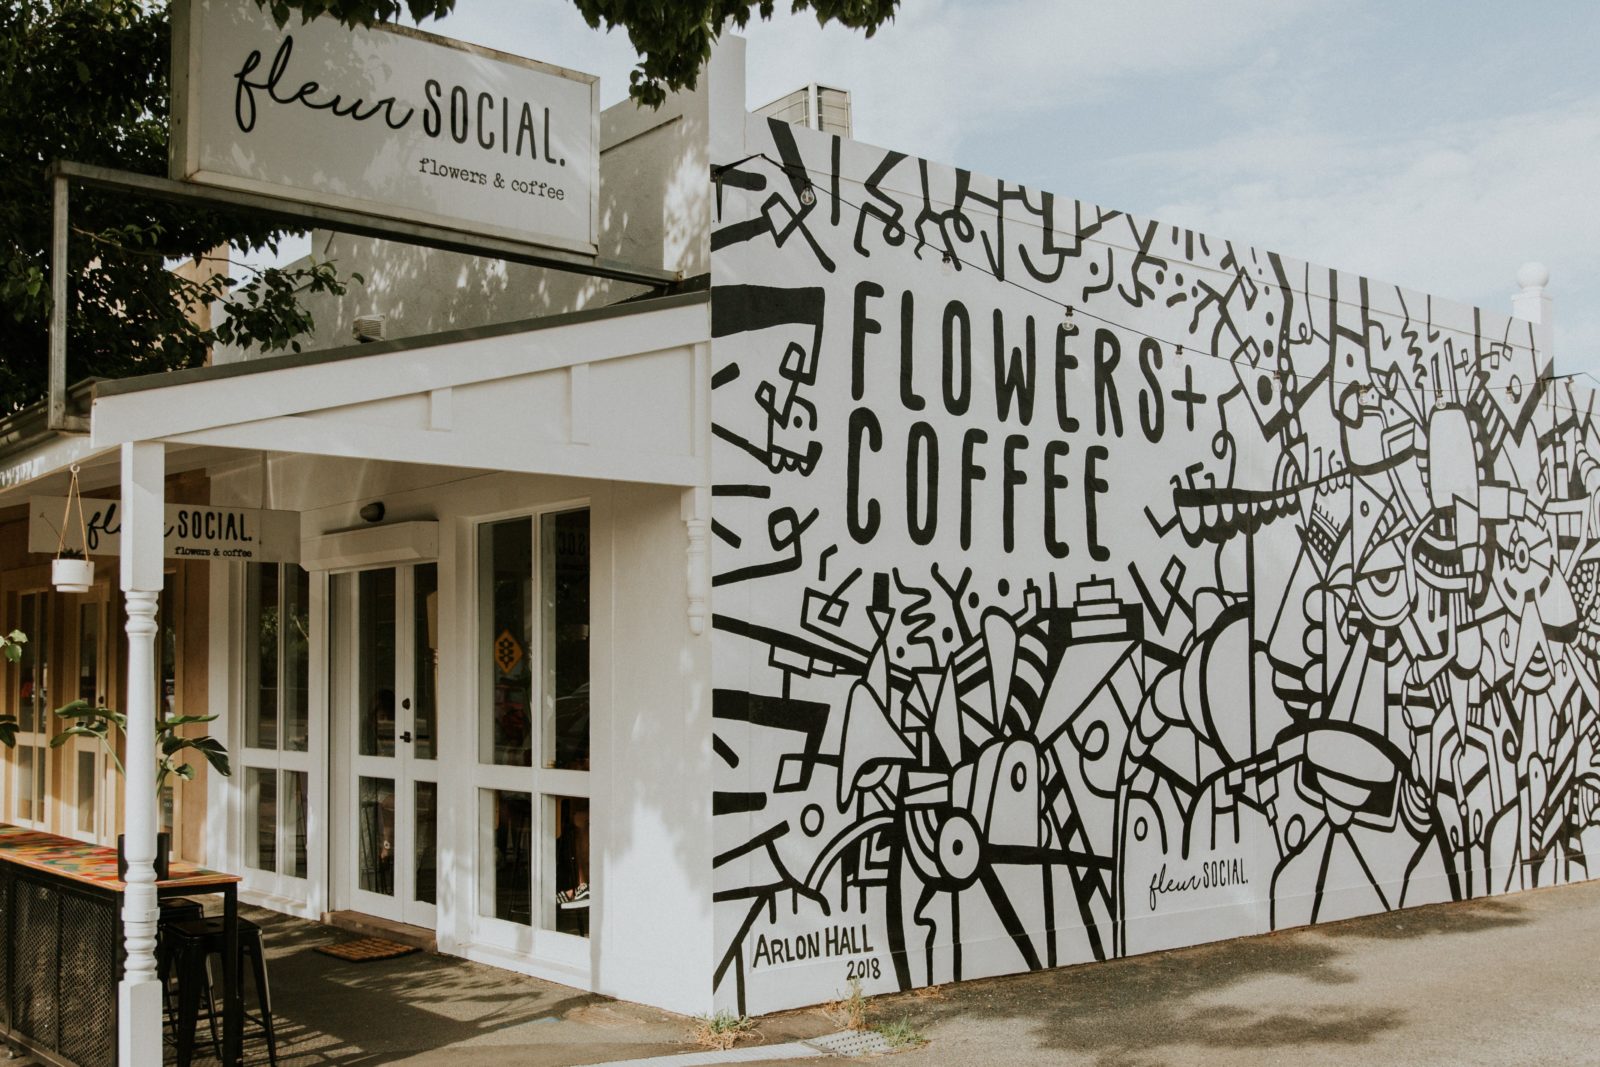 Fleur Social exterior shot including Flowers + Coffee and mural